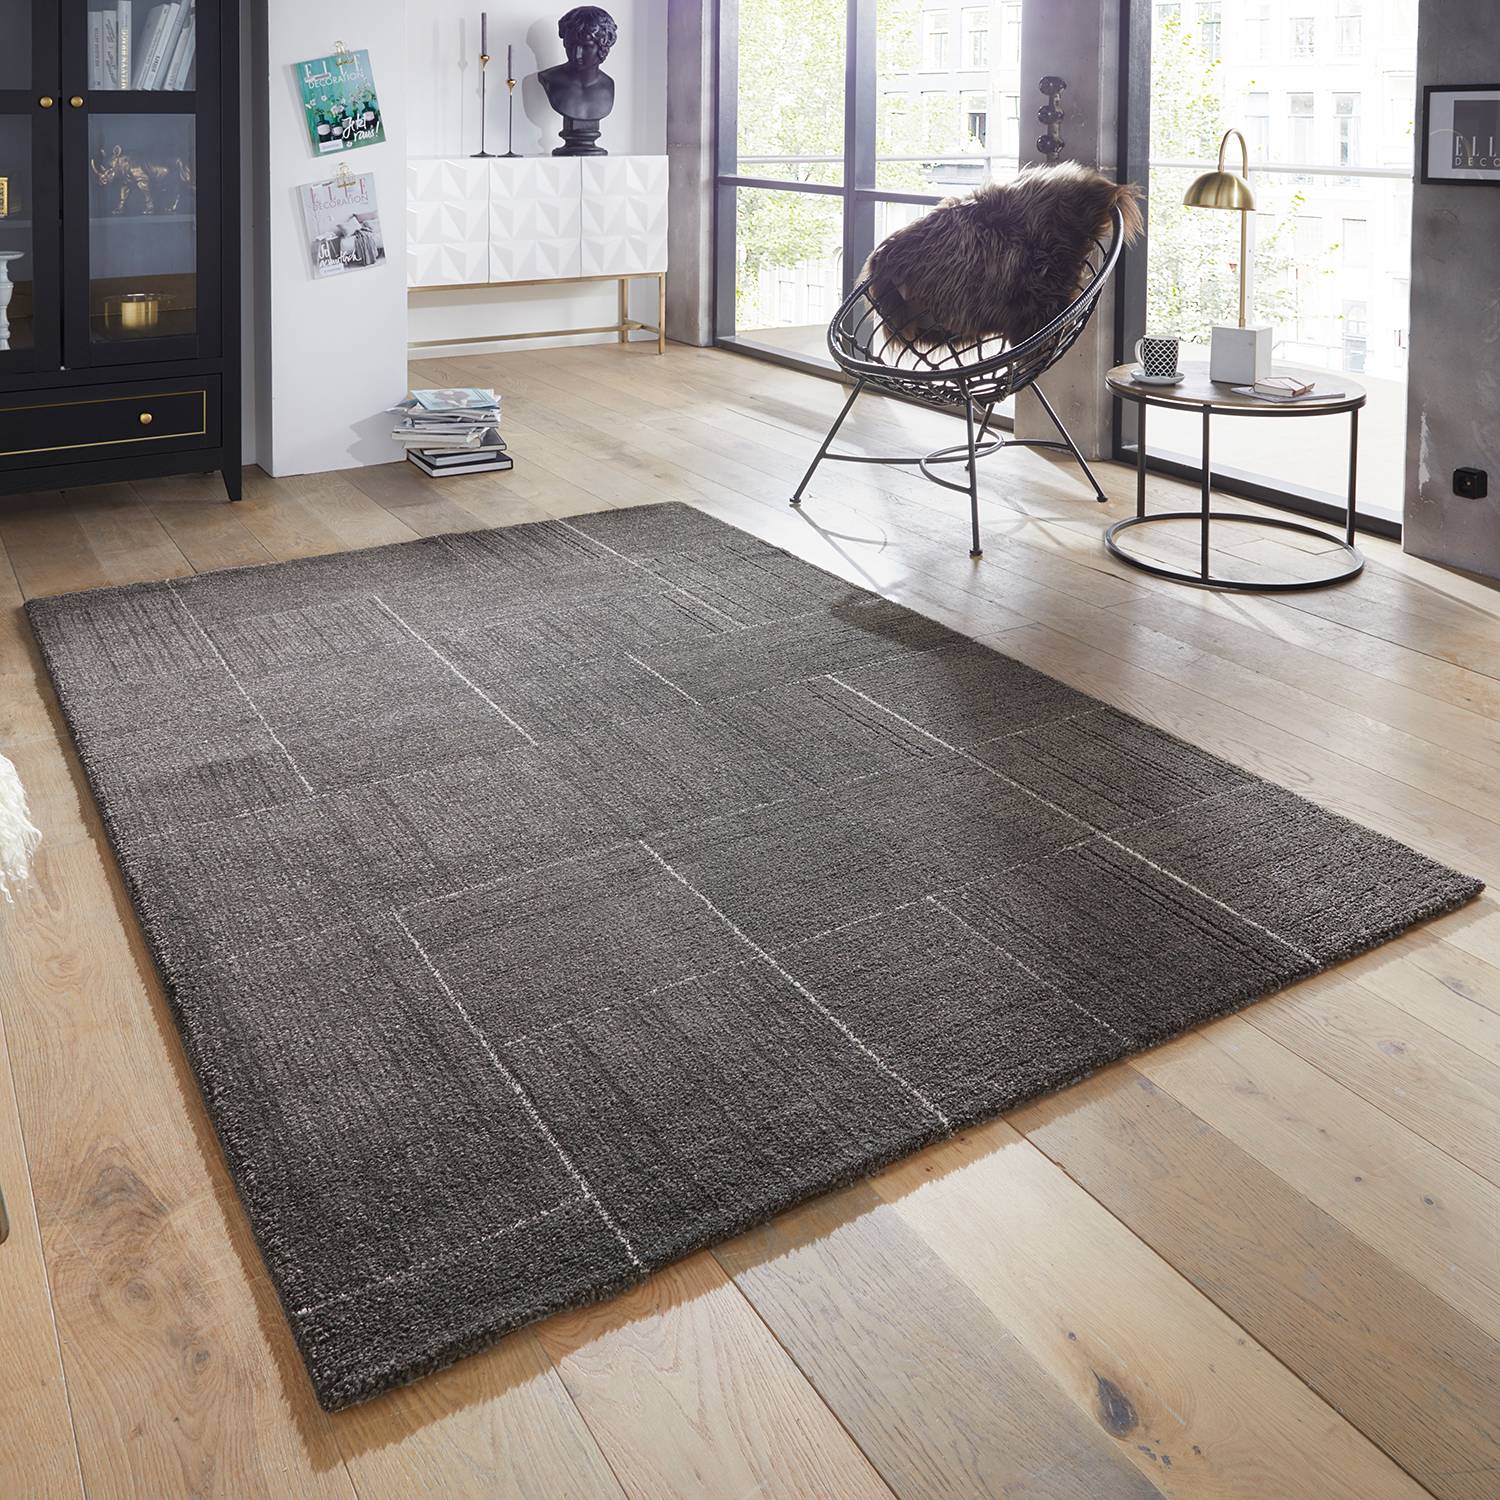 Image of Tapis Castres 000000001000167830